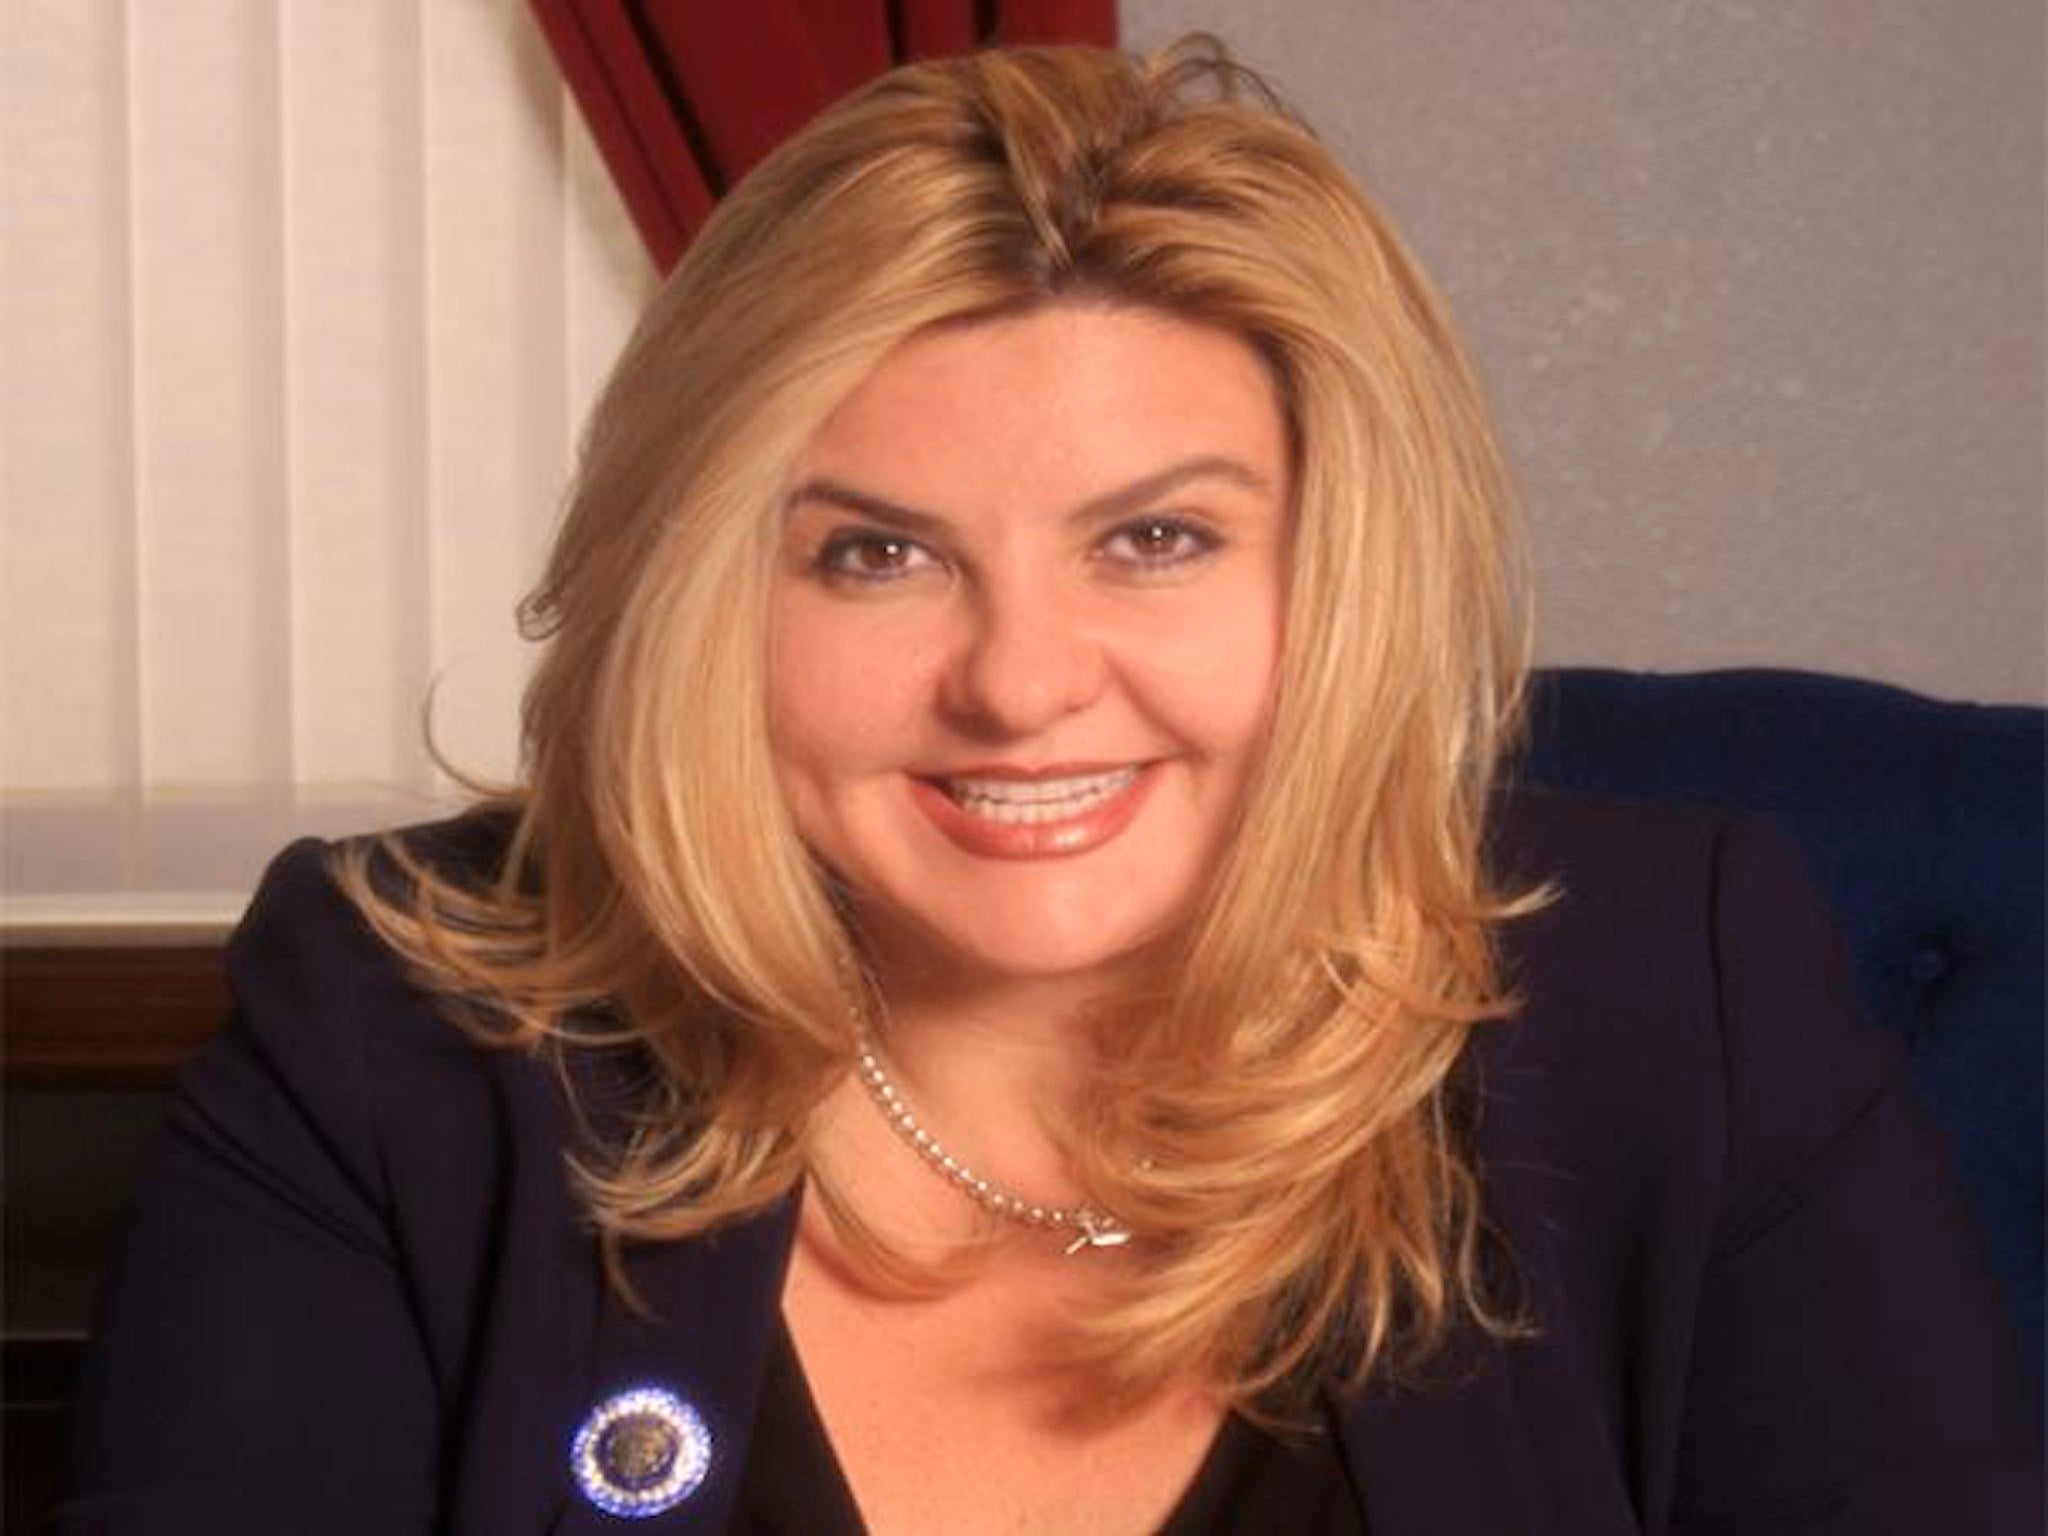 Michele Fiore sparked controversy with her comments over firearms on campuses